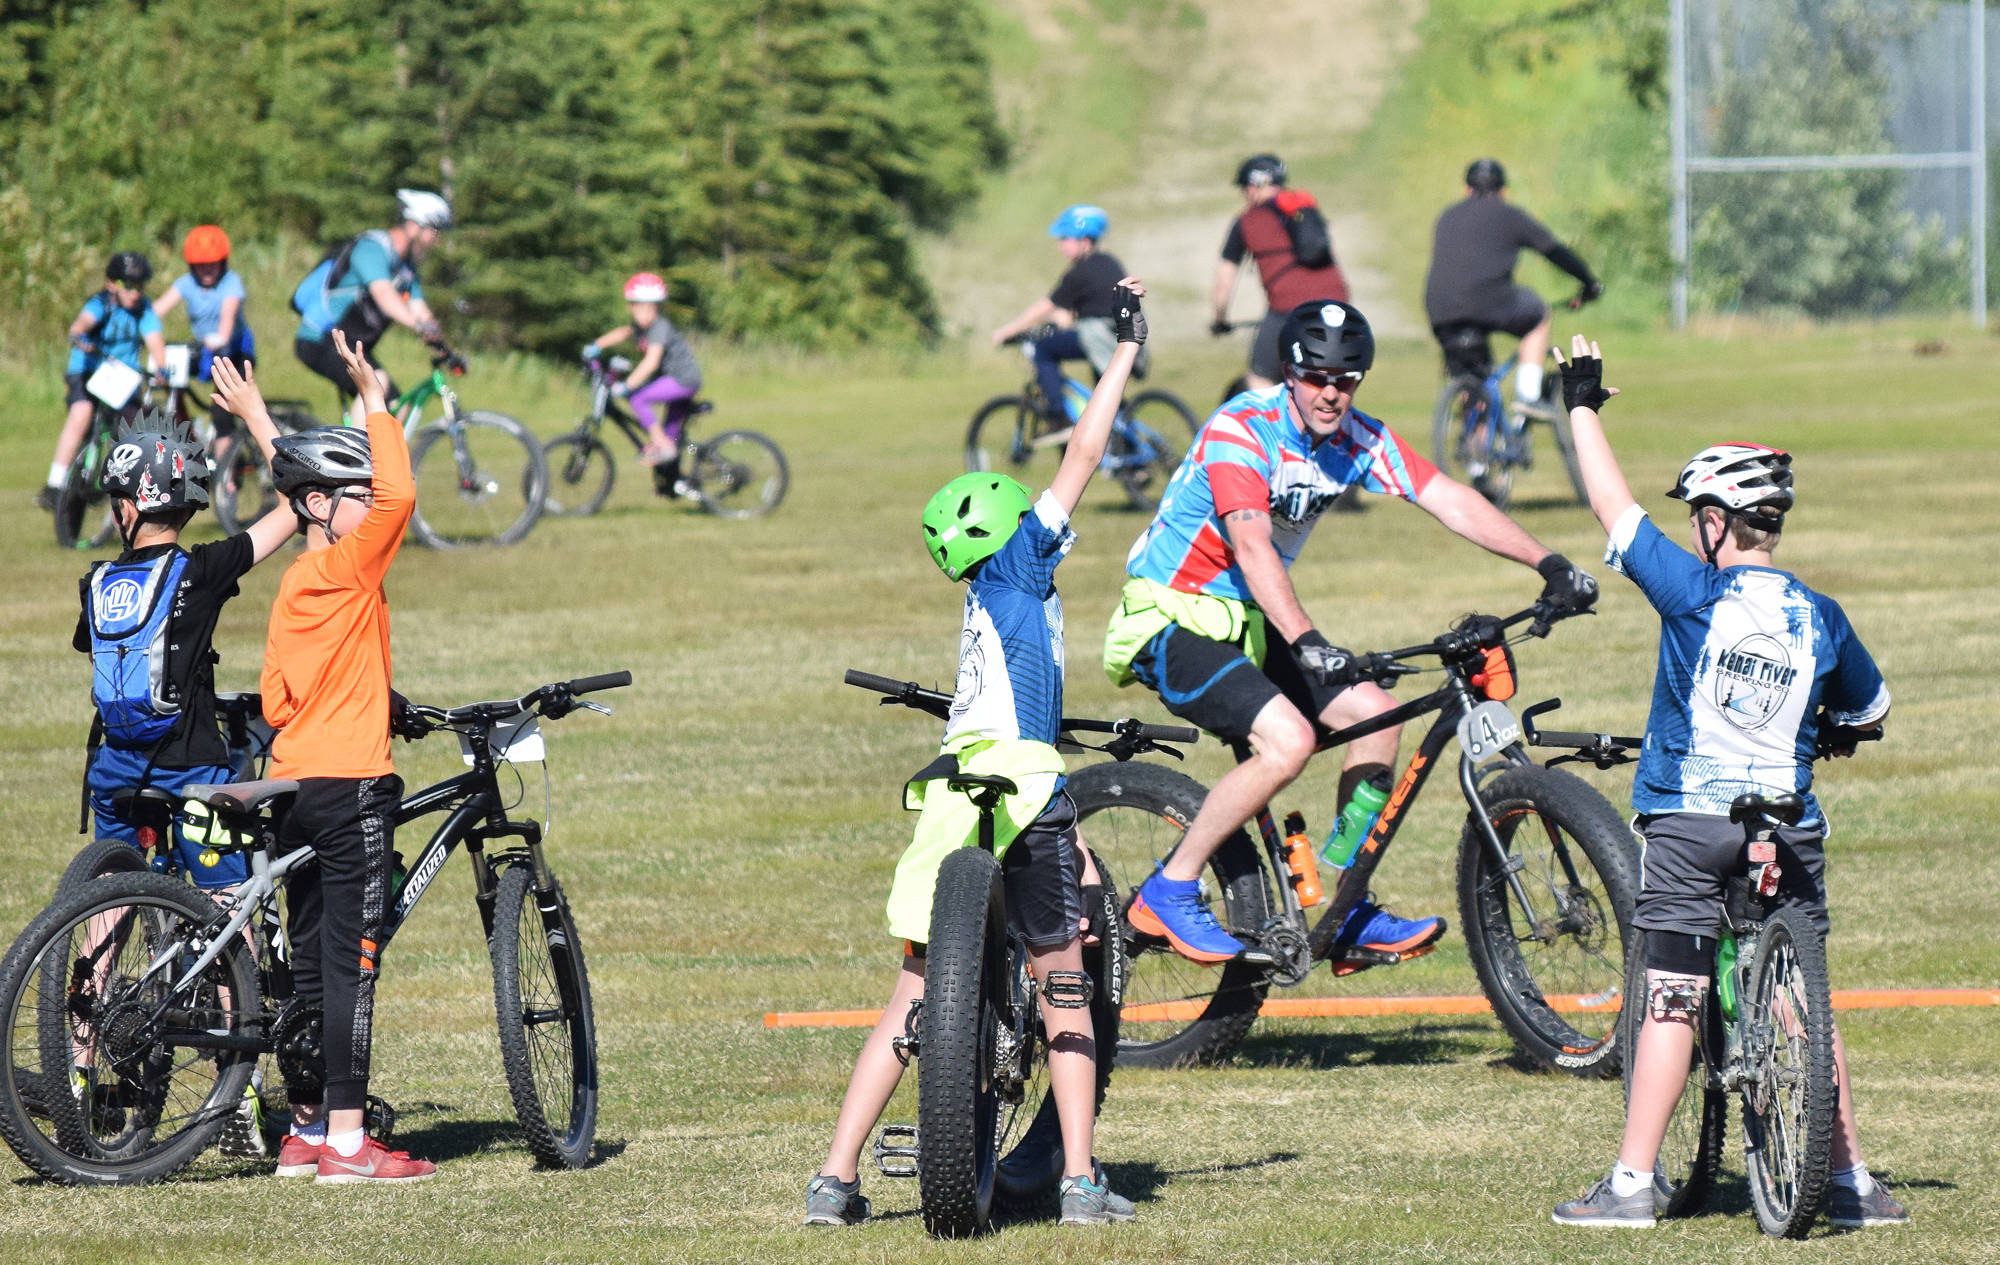 Tsalteshi Sprockets volunteer coach Rob Carson teaches a group of youth riders Thursday, June 14, at the Tsalteshi Trails in Soldotna. (Photo by Joey Klecka/Peninsula Clarion)